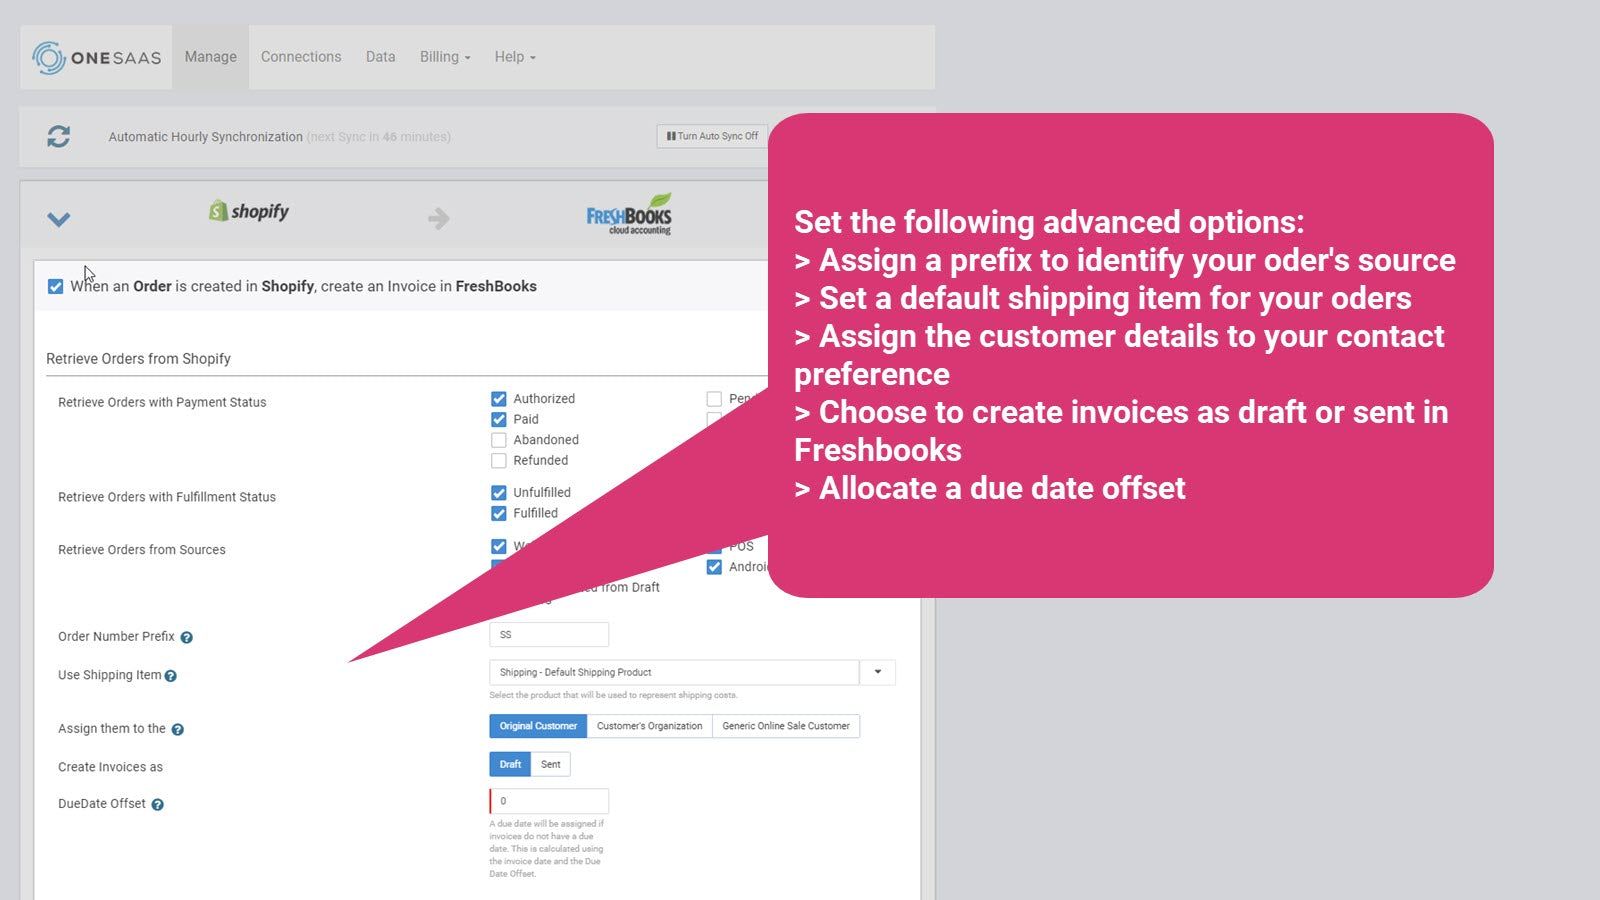 Options to set how orders create invoices in FreshBooks